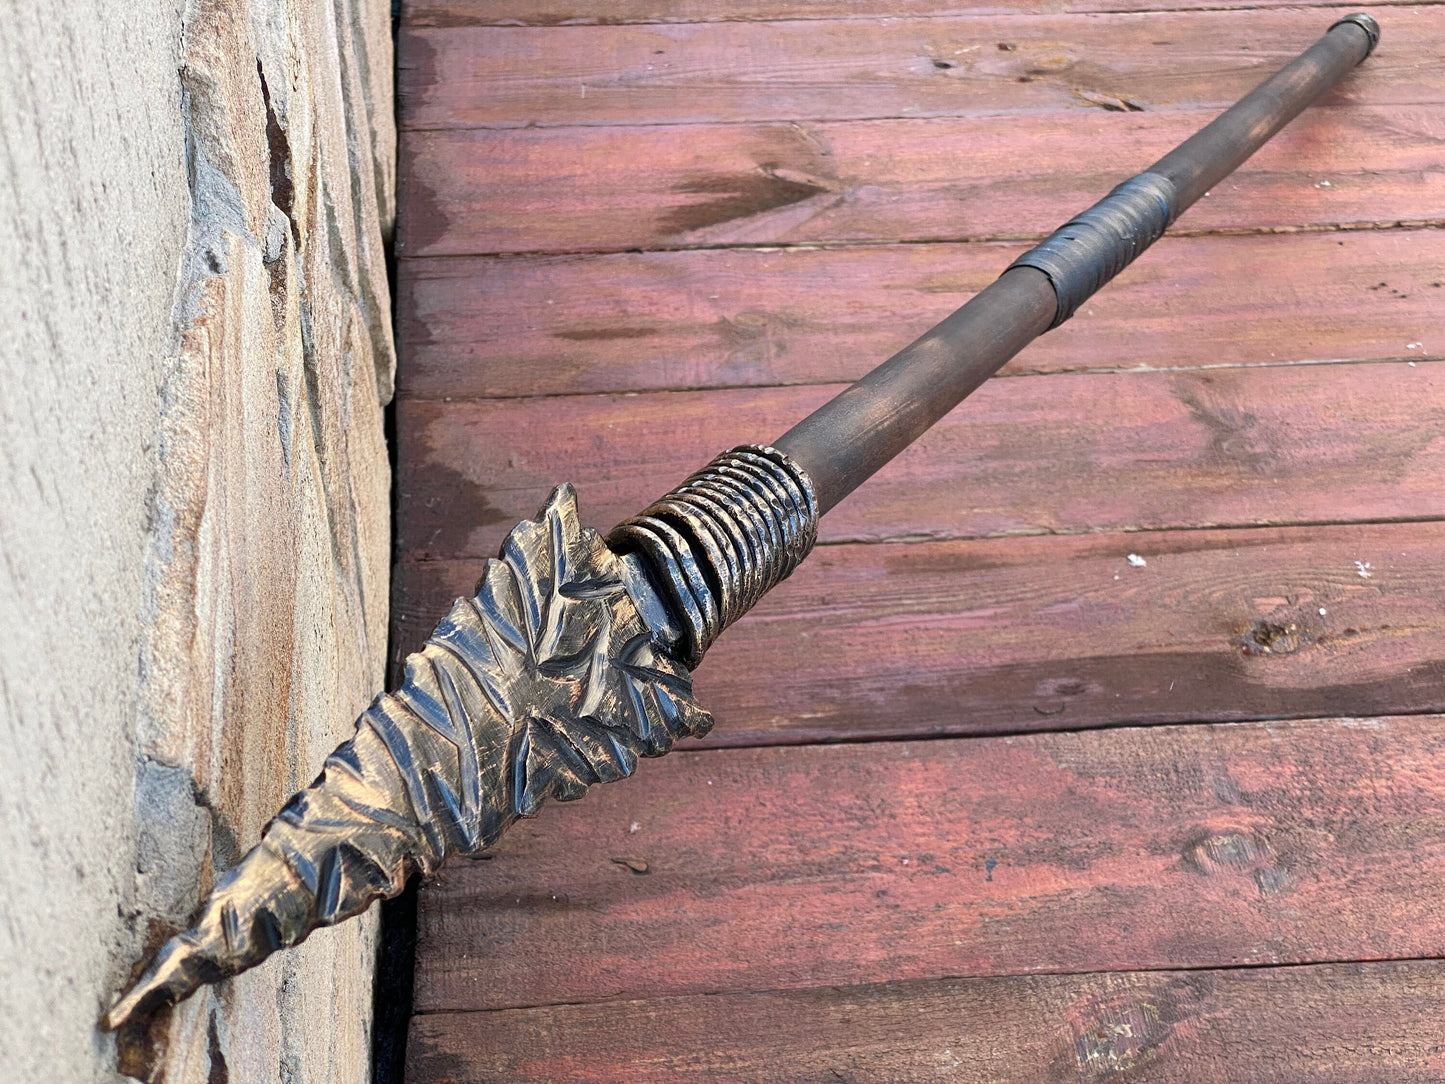 Viking spear, medieval spear, spear, birthday, viking, castle, Middle Ages, Christmas, gift for men, anniversary, personalized gift, trident